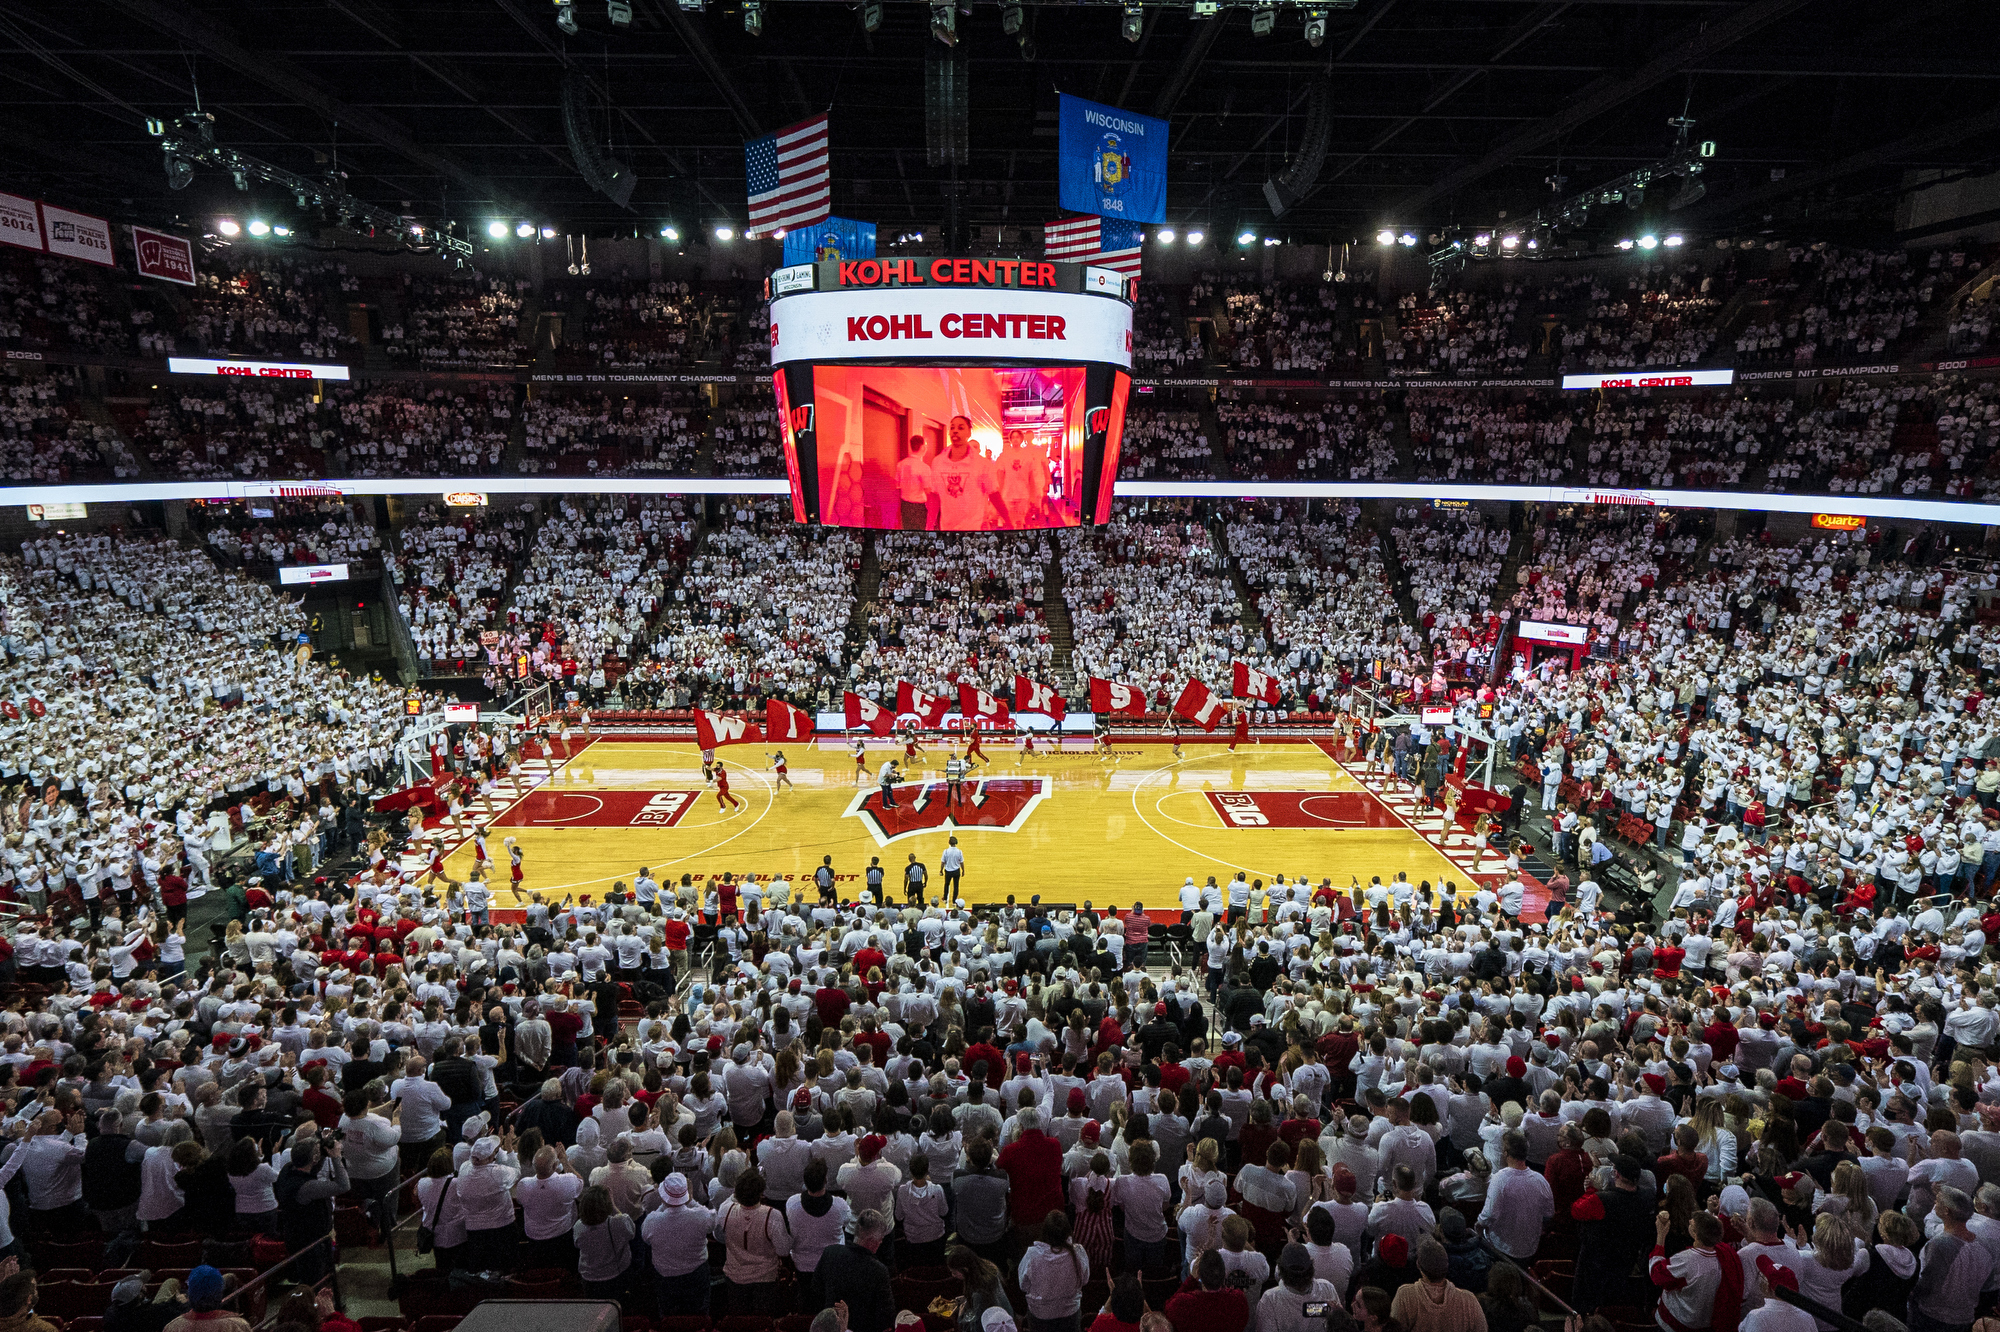 The Kohl Center, home of the Wisconsin Badgers basketball team,